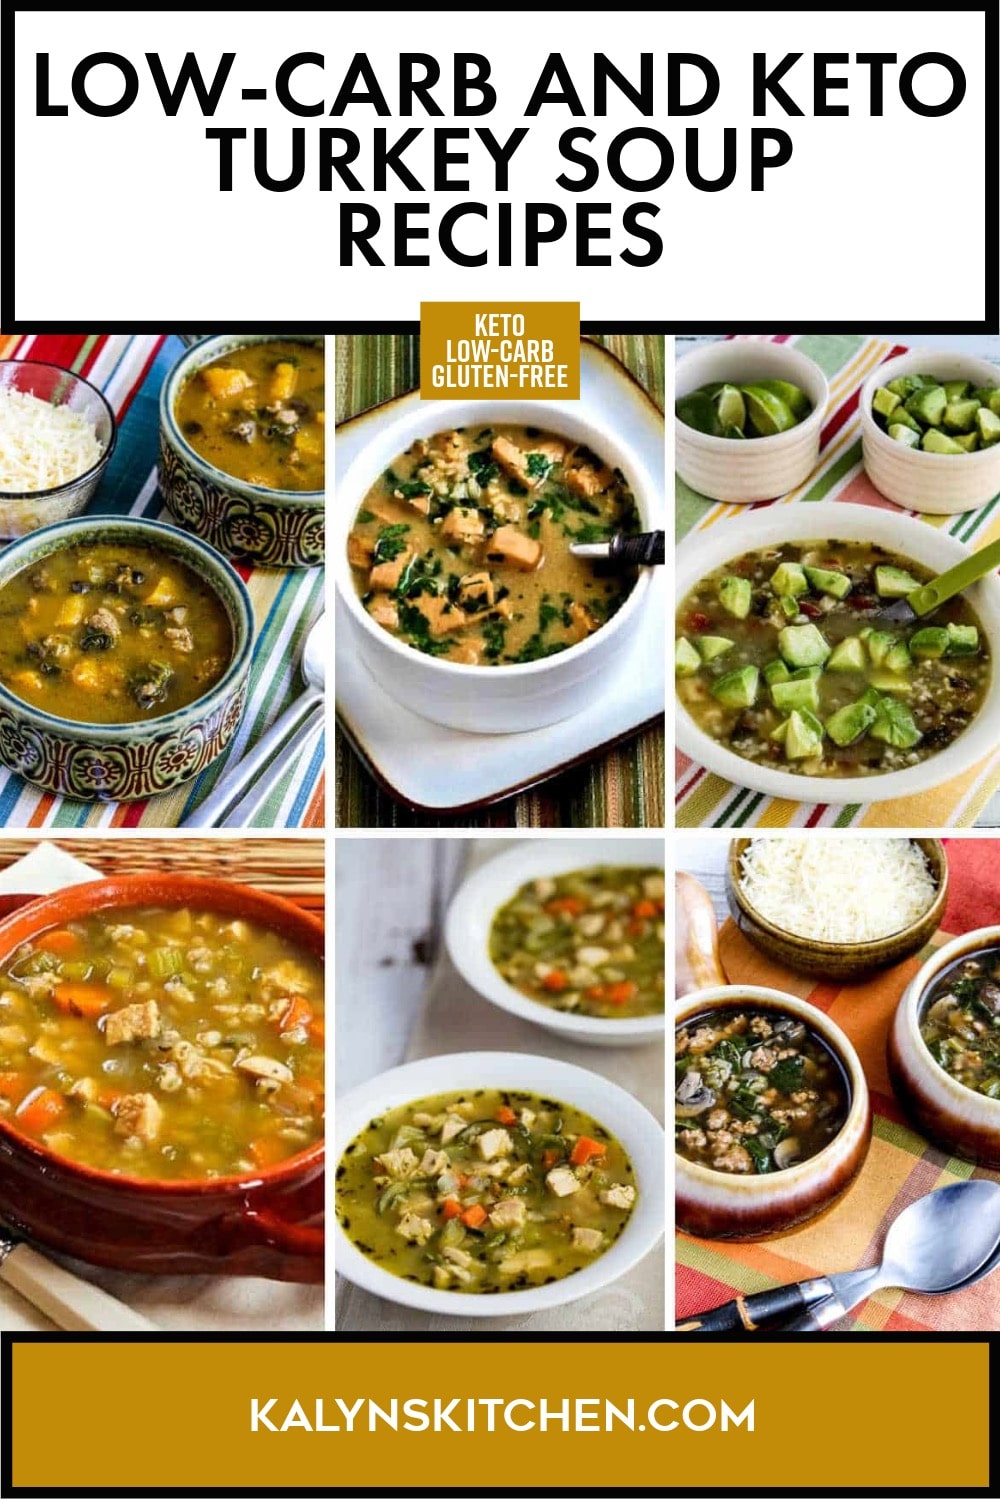 Pinterest image of Low-Carb and Keto Turkey Soup Recipes